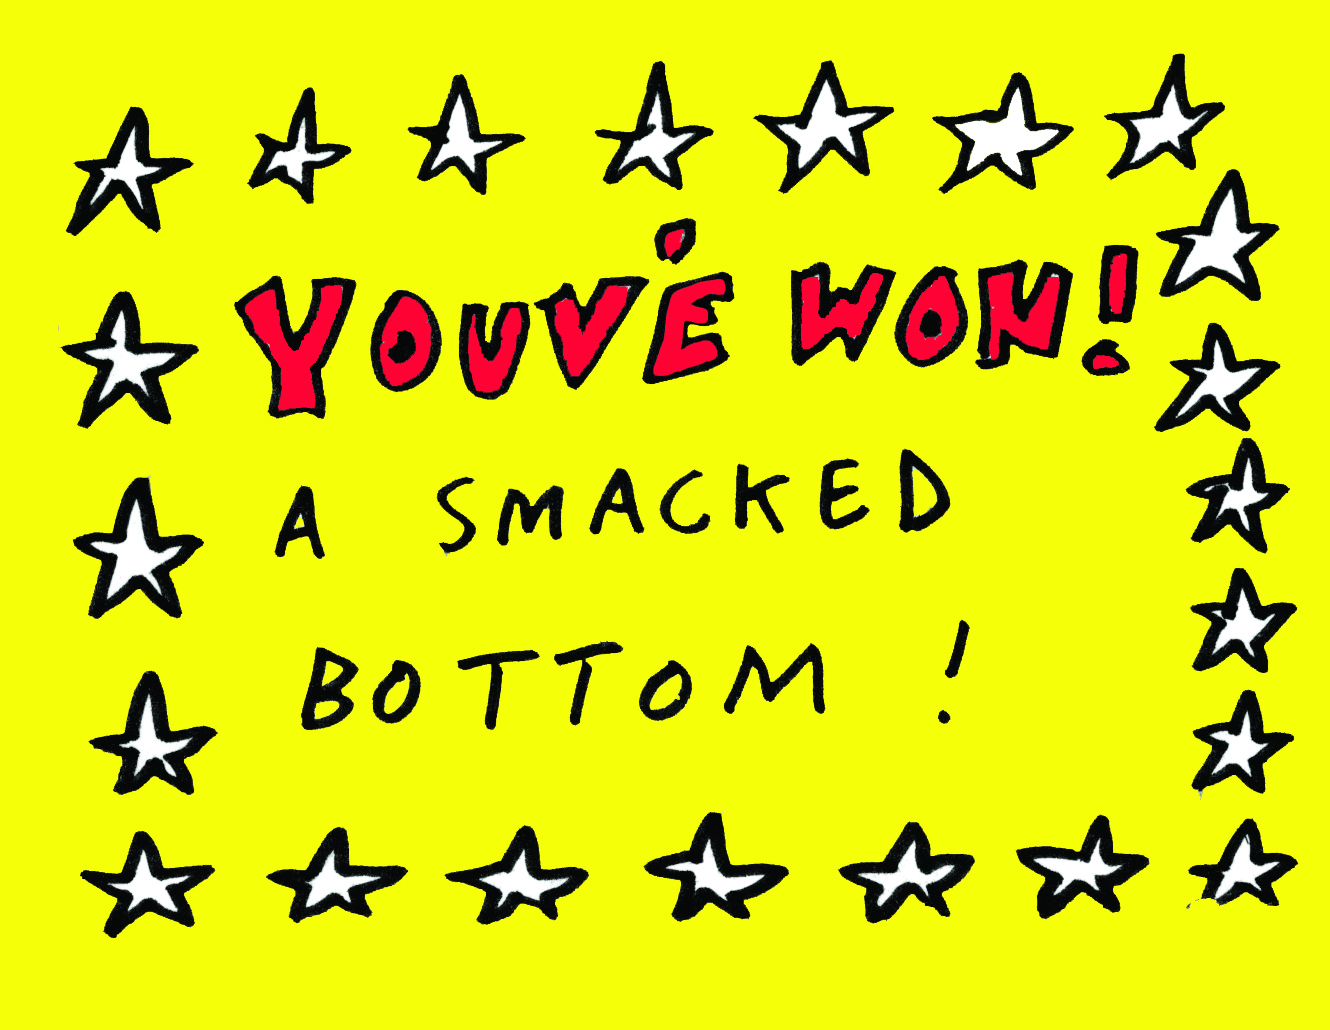 A BA Illustration typographical artwork by Jessica Gledhill featuring a bright yellow background surrounded by stars stating "you've won a smacked bottom".